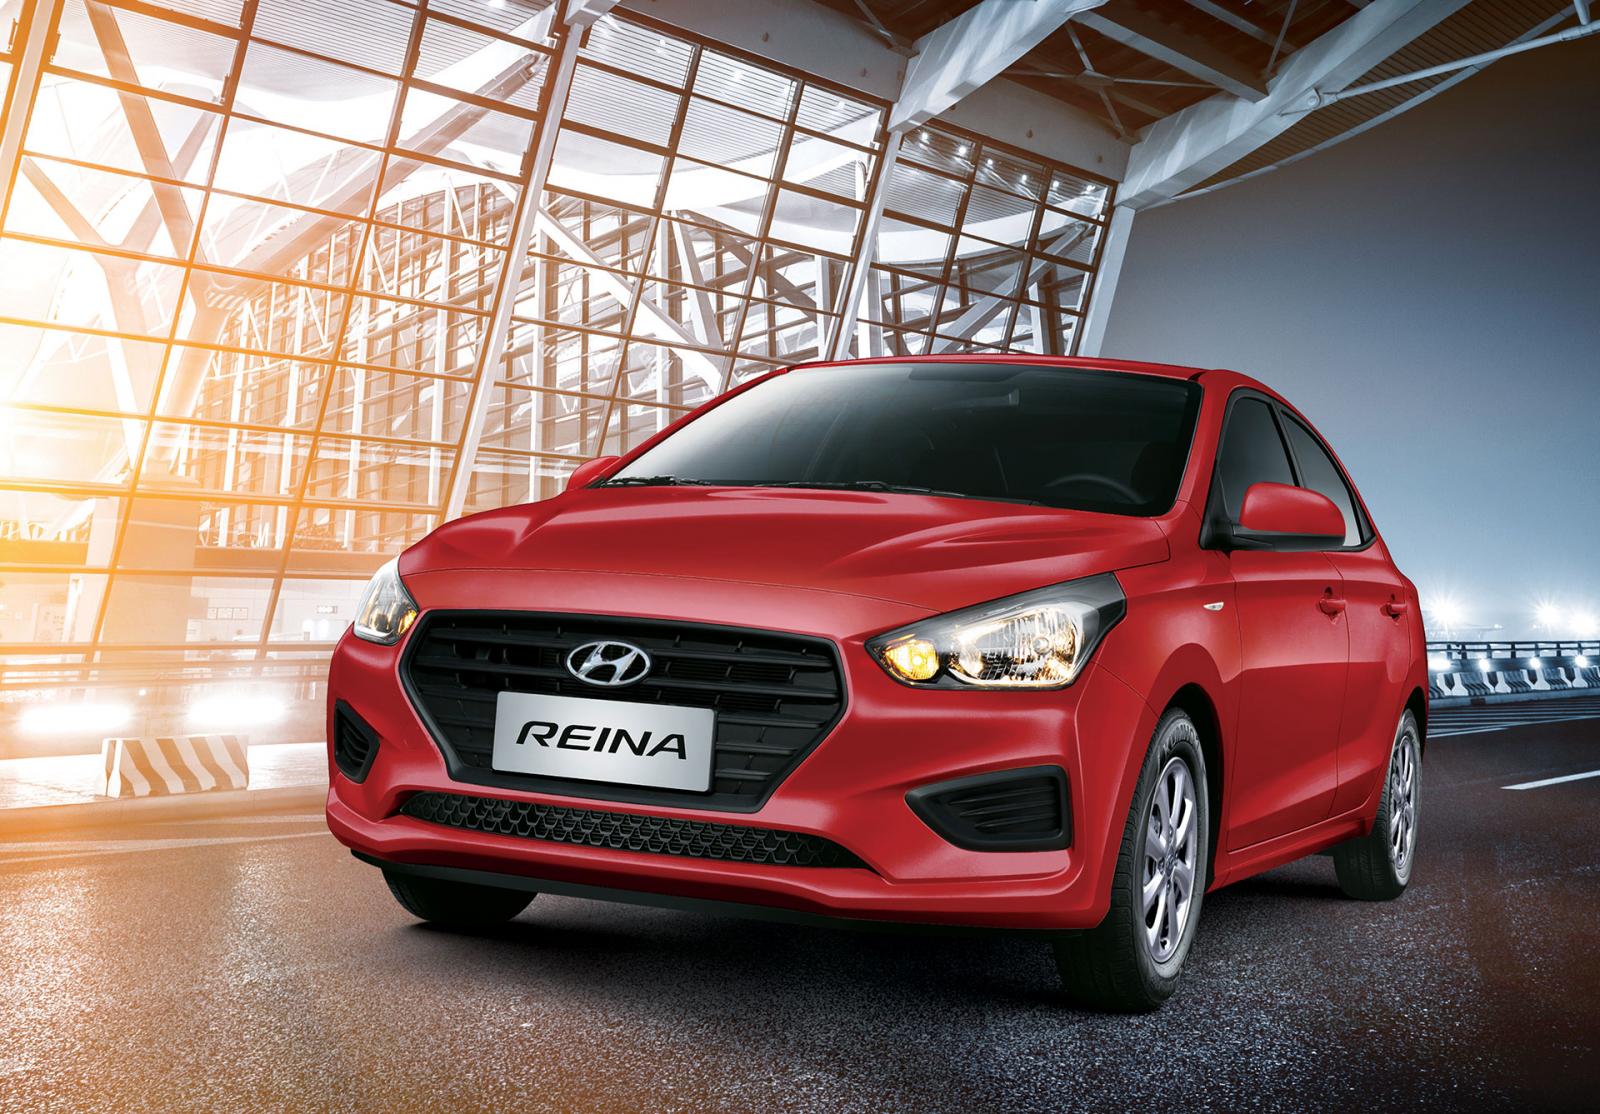 Hyundai Reina Vs Mirage G4 Which Is The Better Product For You?